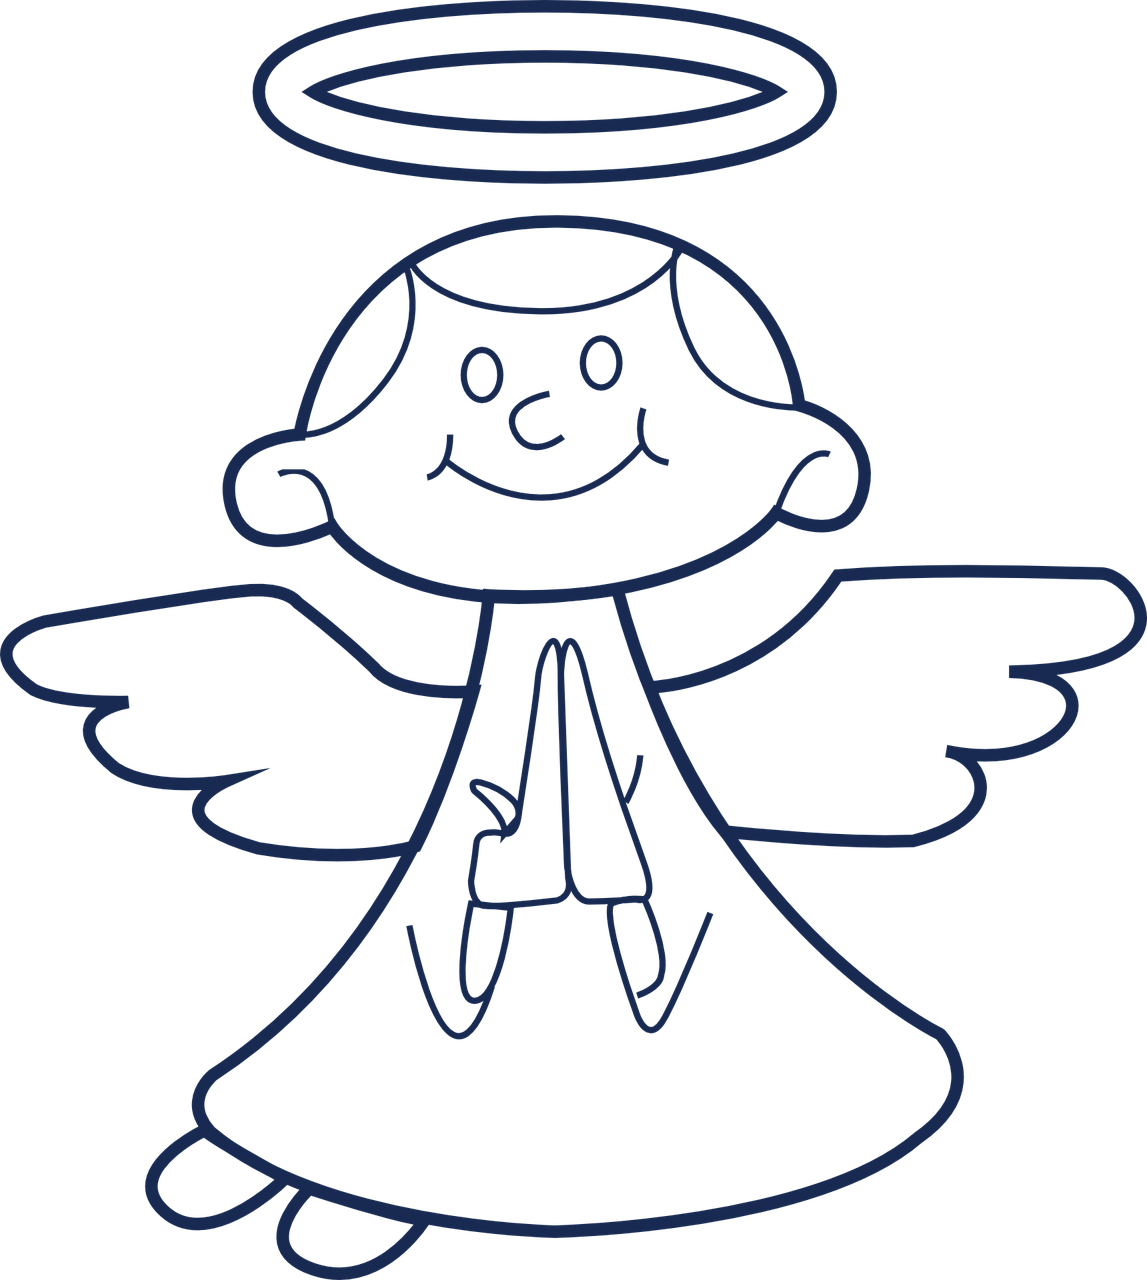 a cartoon angel with a halo on his head, inspired by Ángel Botello, pexels, ascii art, decorative dark blue clothing, black light, she is happy, based on child's drawing